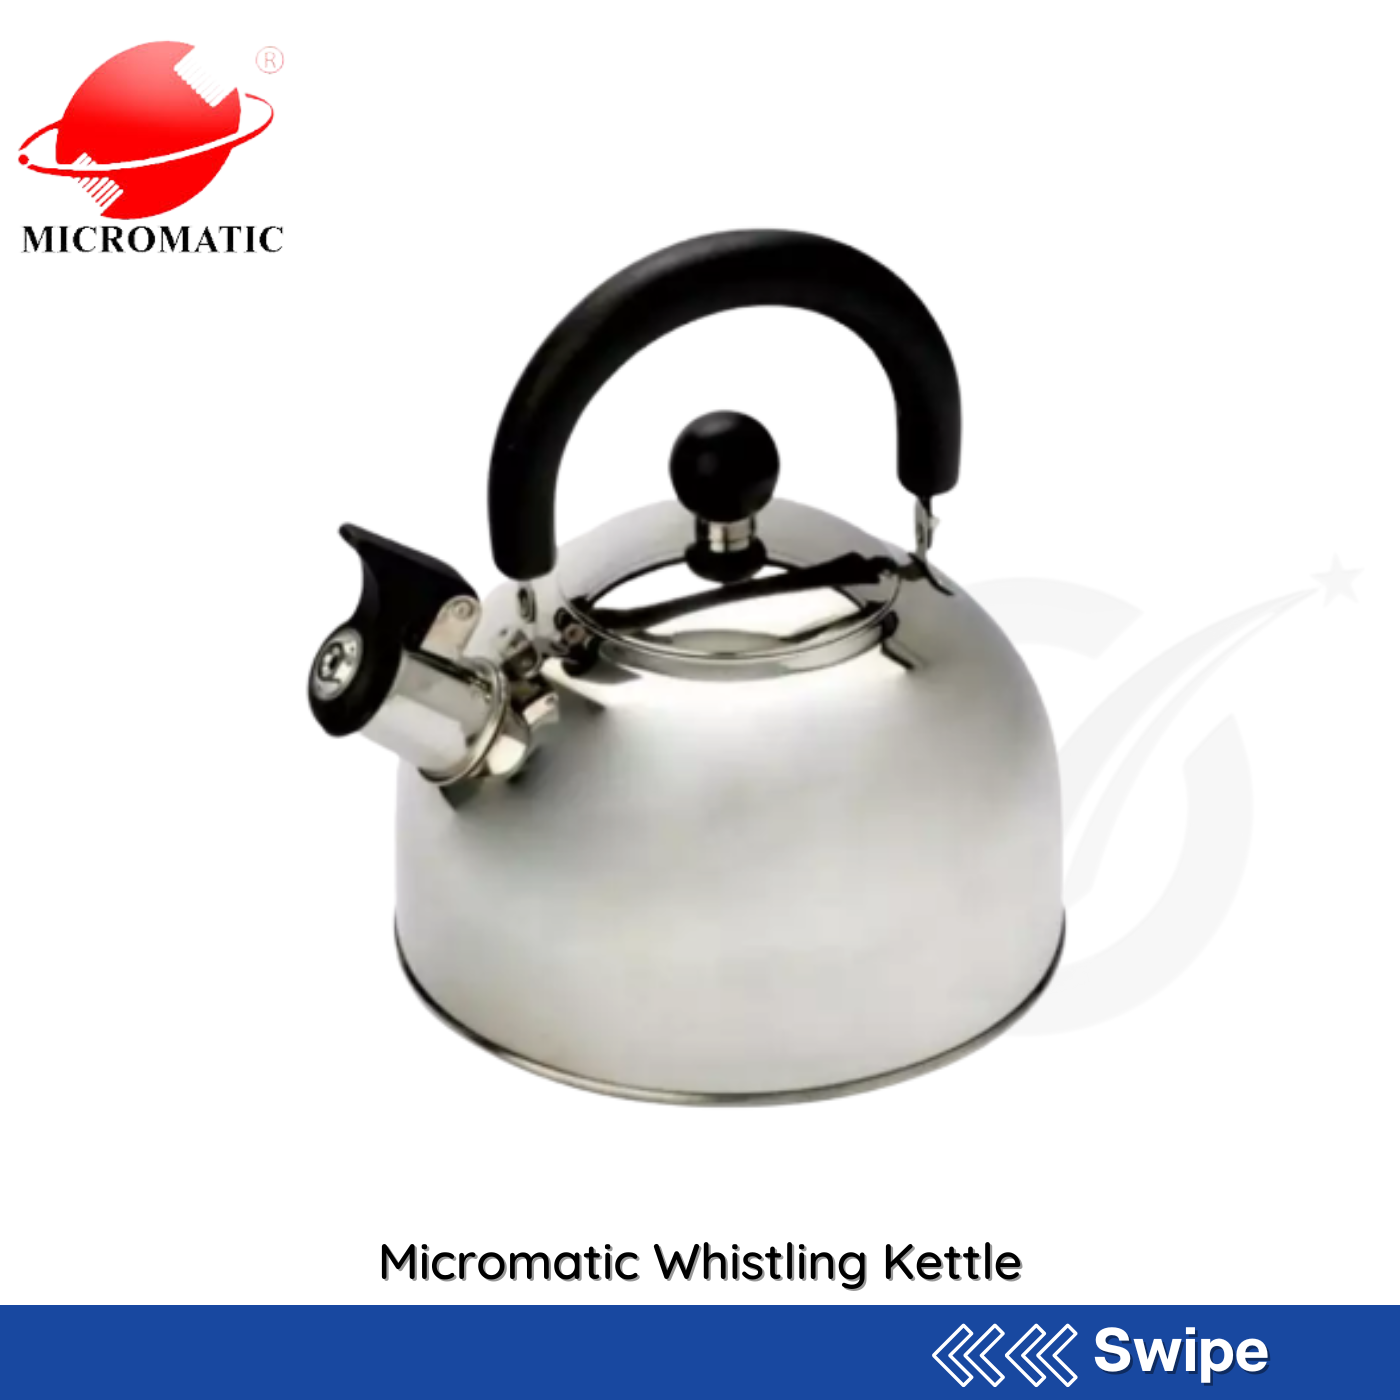 Micromatic Whistling Kettle